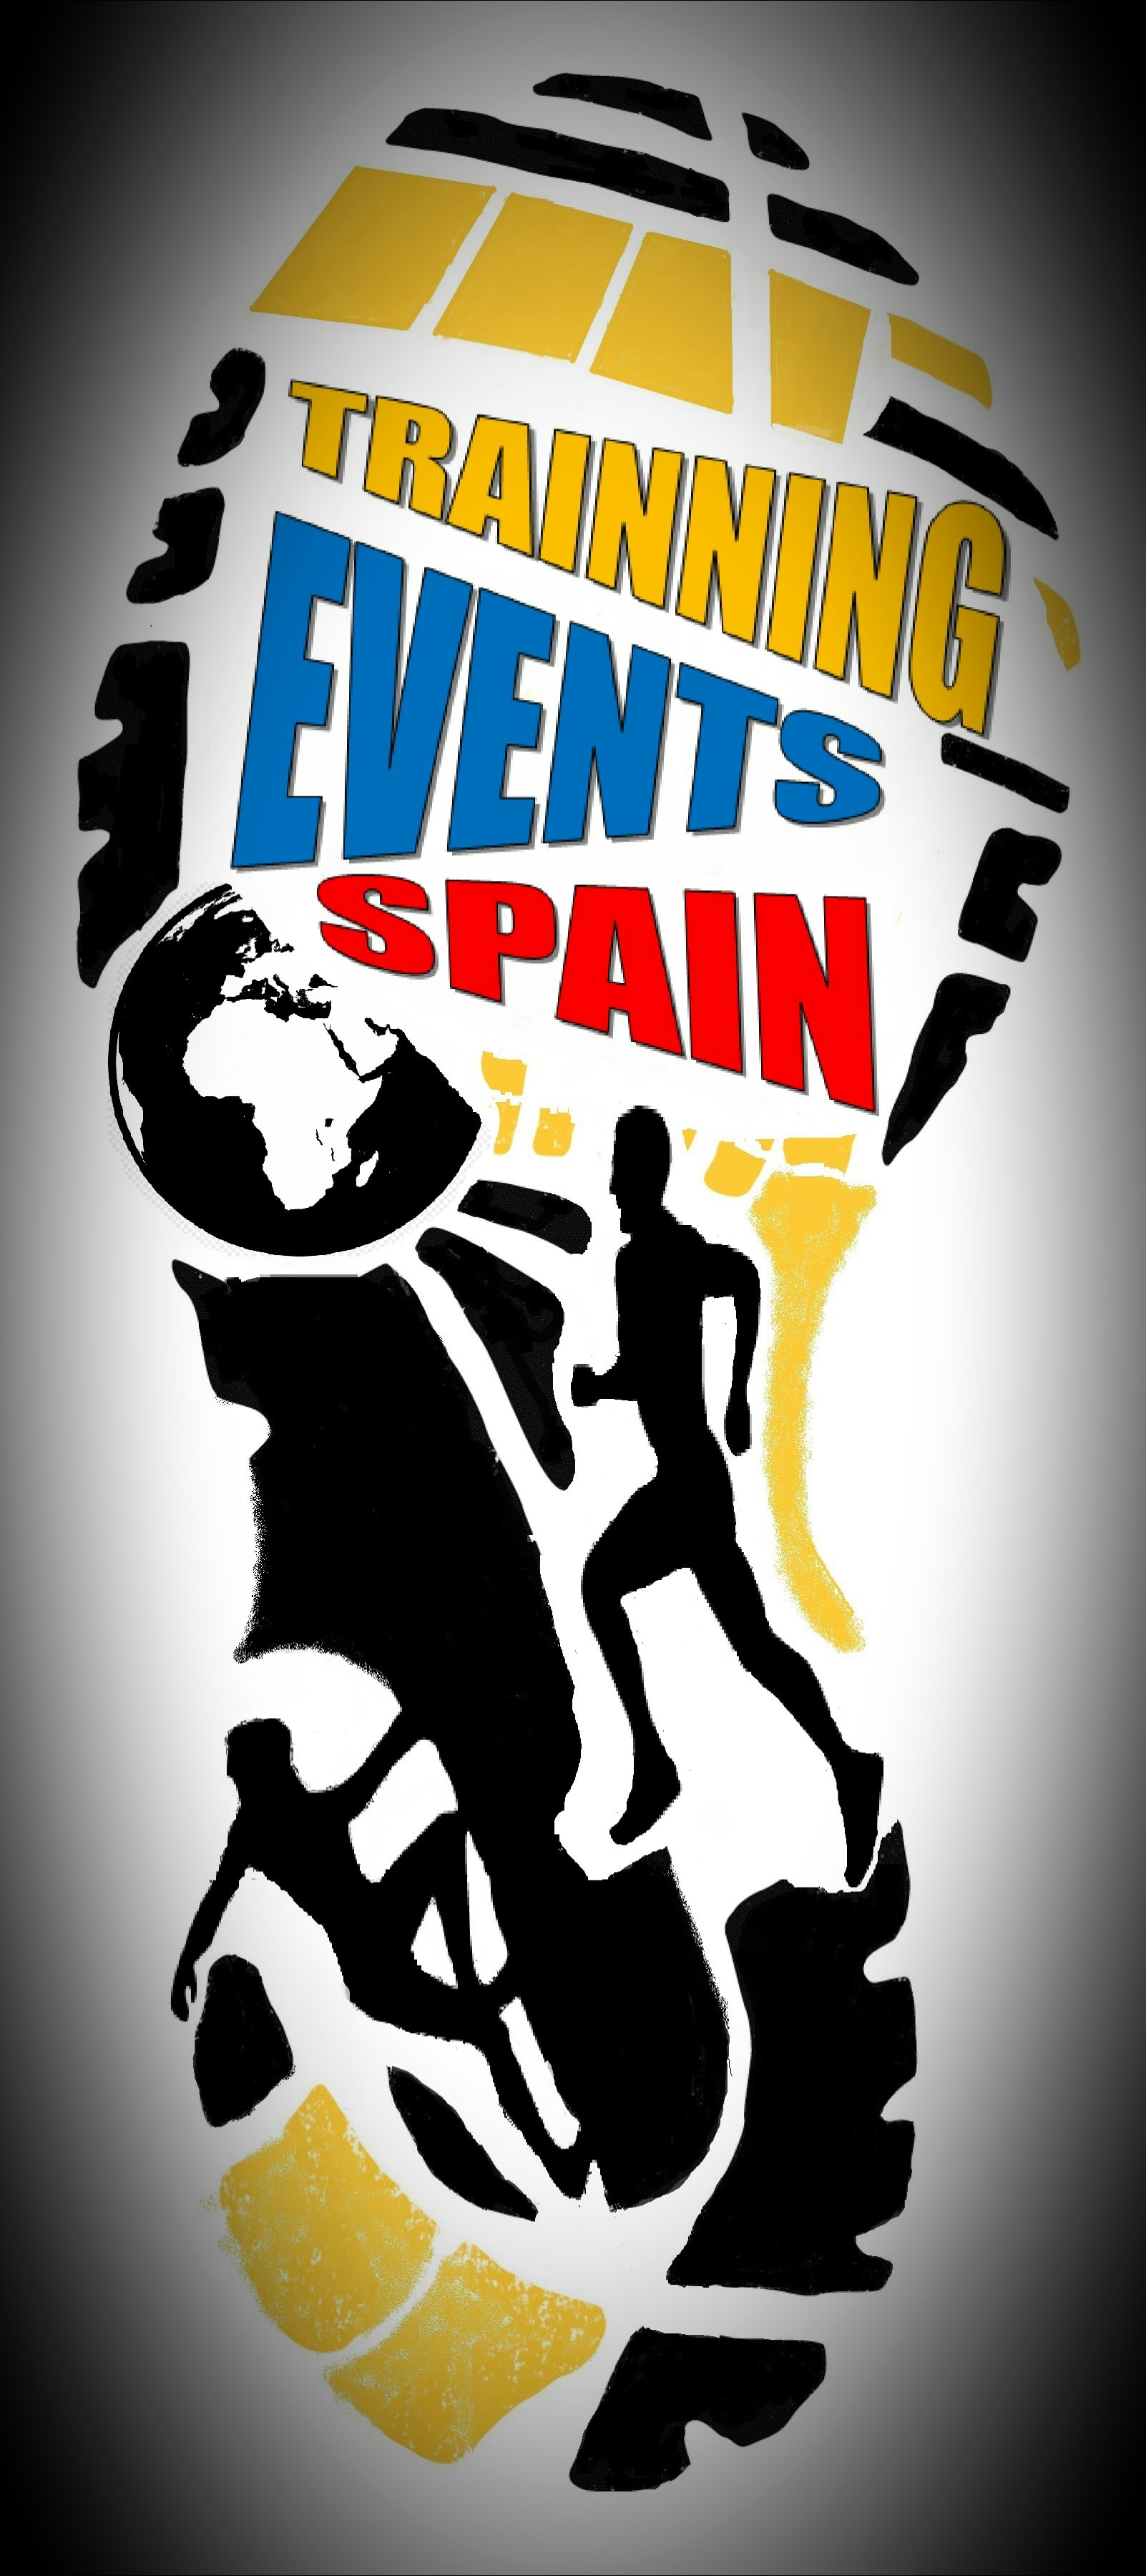 TRAINNING EVENTS SPAIN